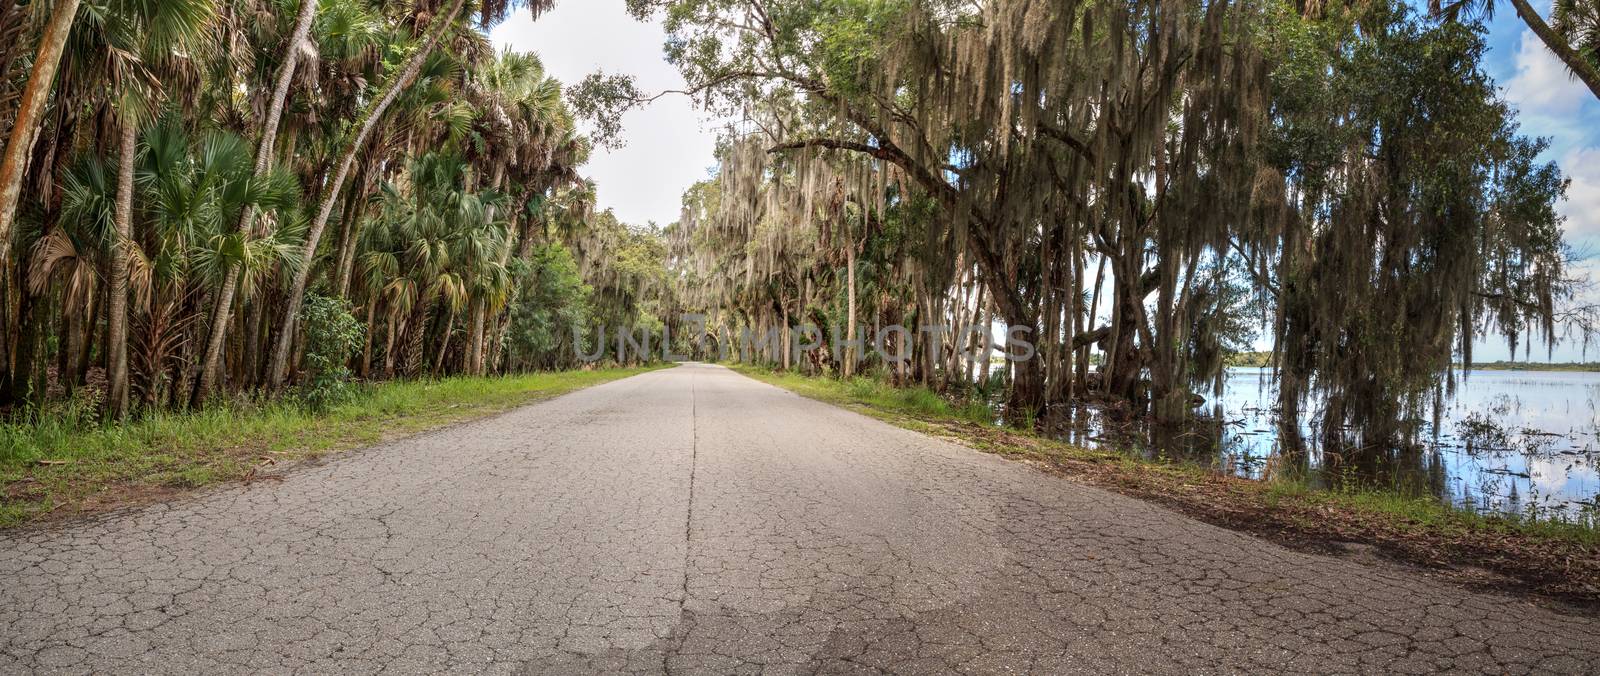 Spanish  moss hangs from trees that line the road by steffstarr